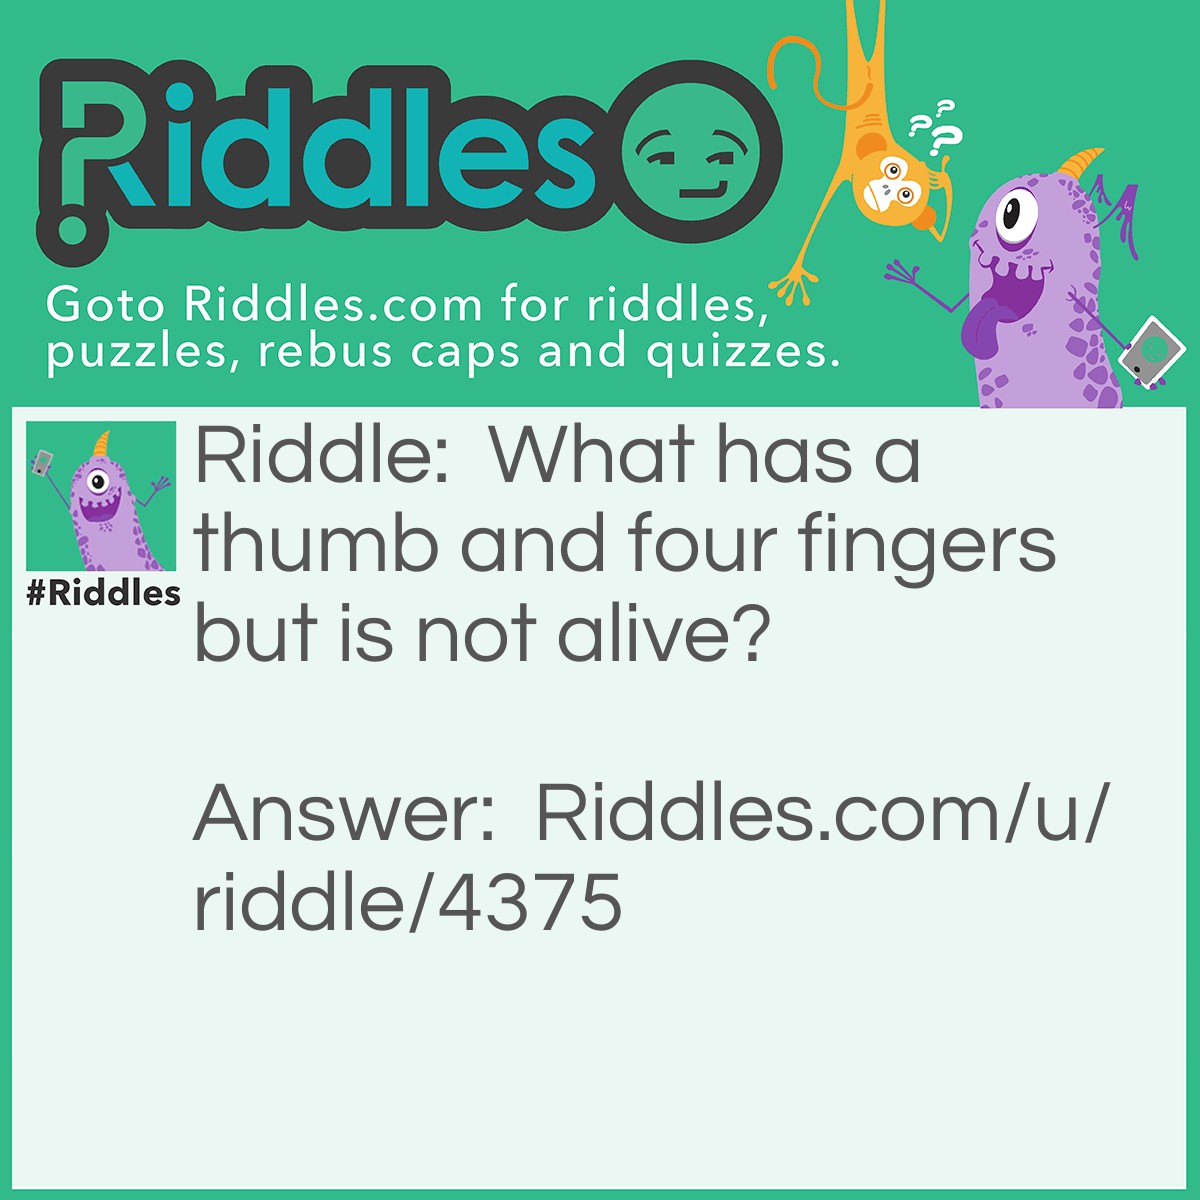 Riddle: What has a thumb and four fingers but is not alive? Answer: A glove!